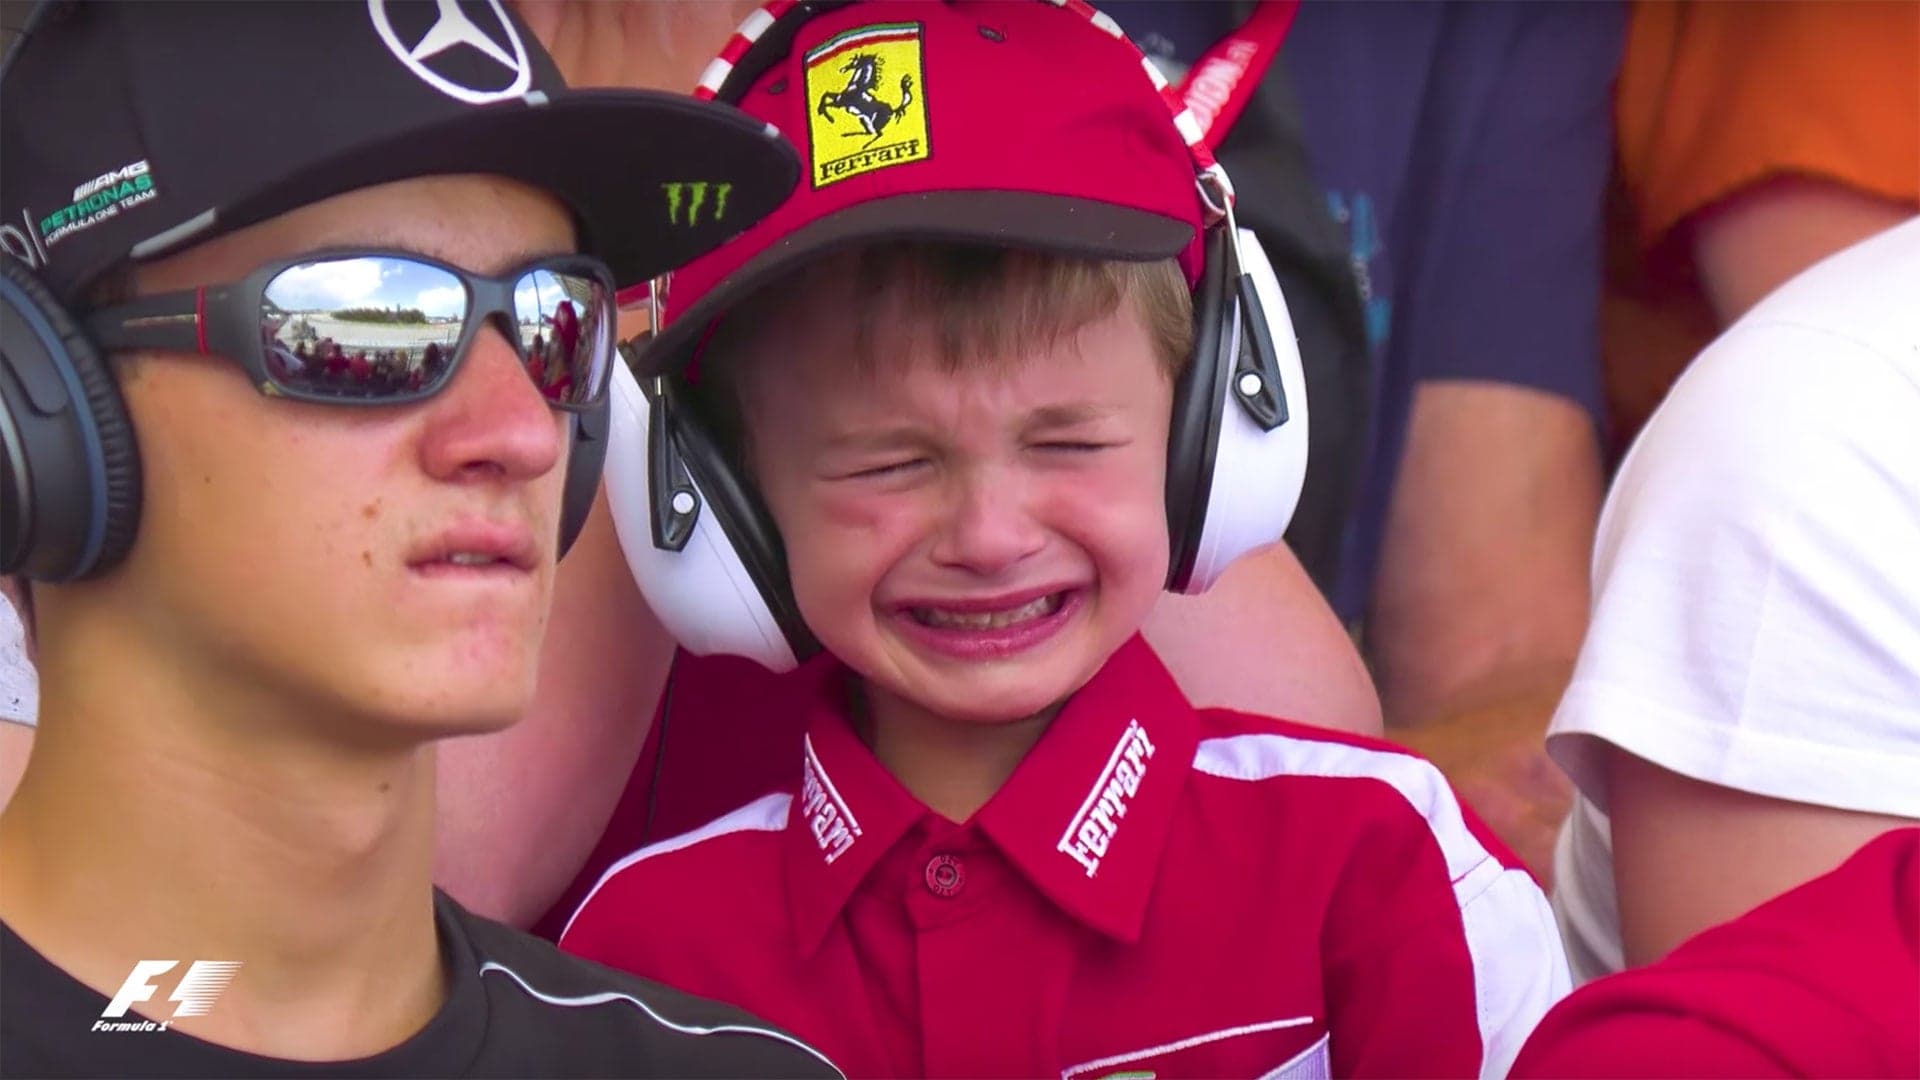 Kimi Raikkonen Meets Young Formula 1 Fan After Kid Brought to Tears by Crash